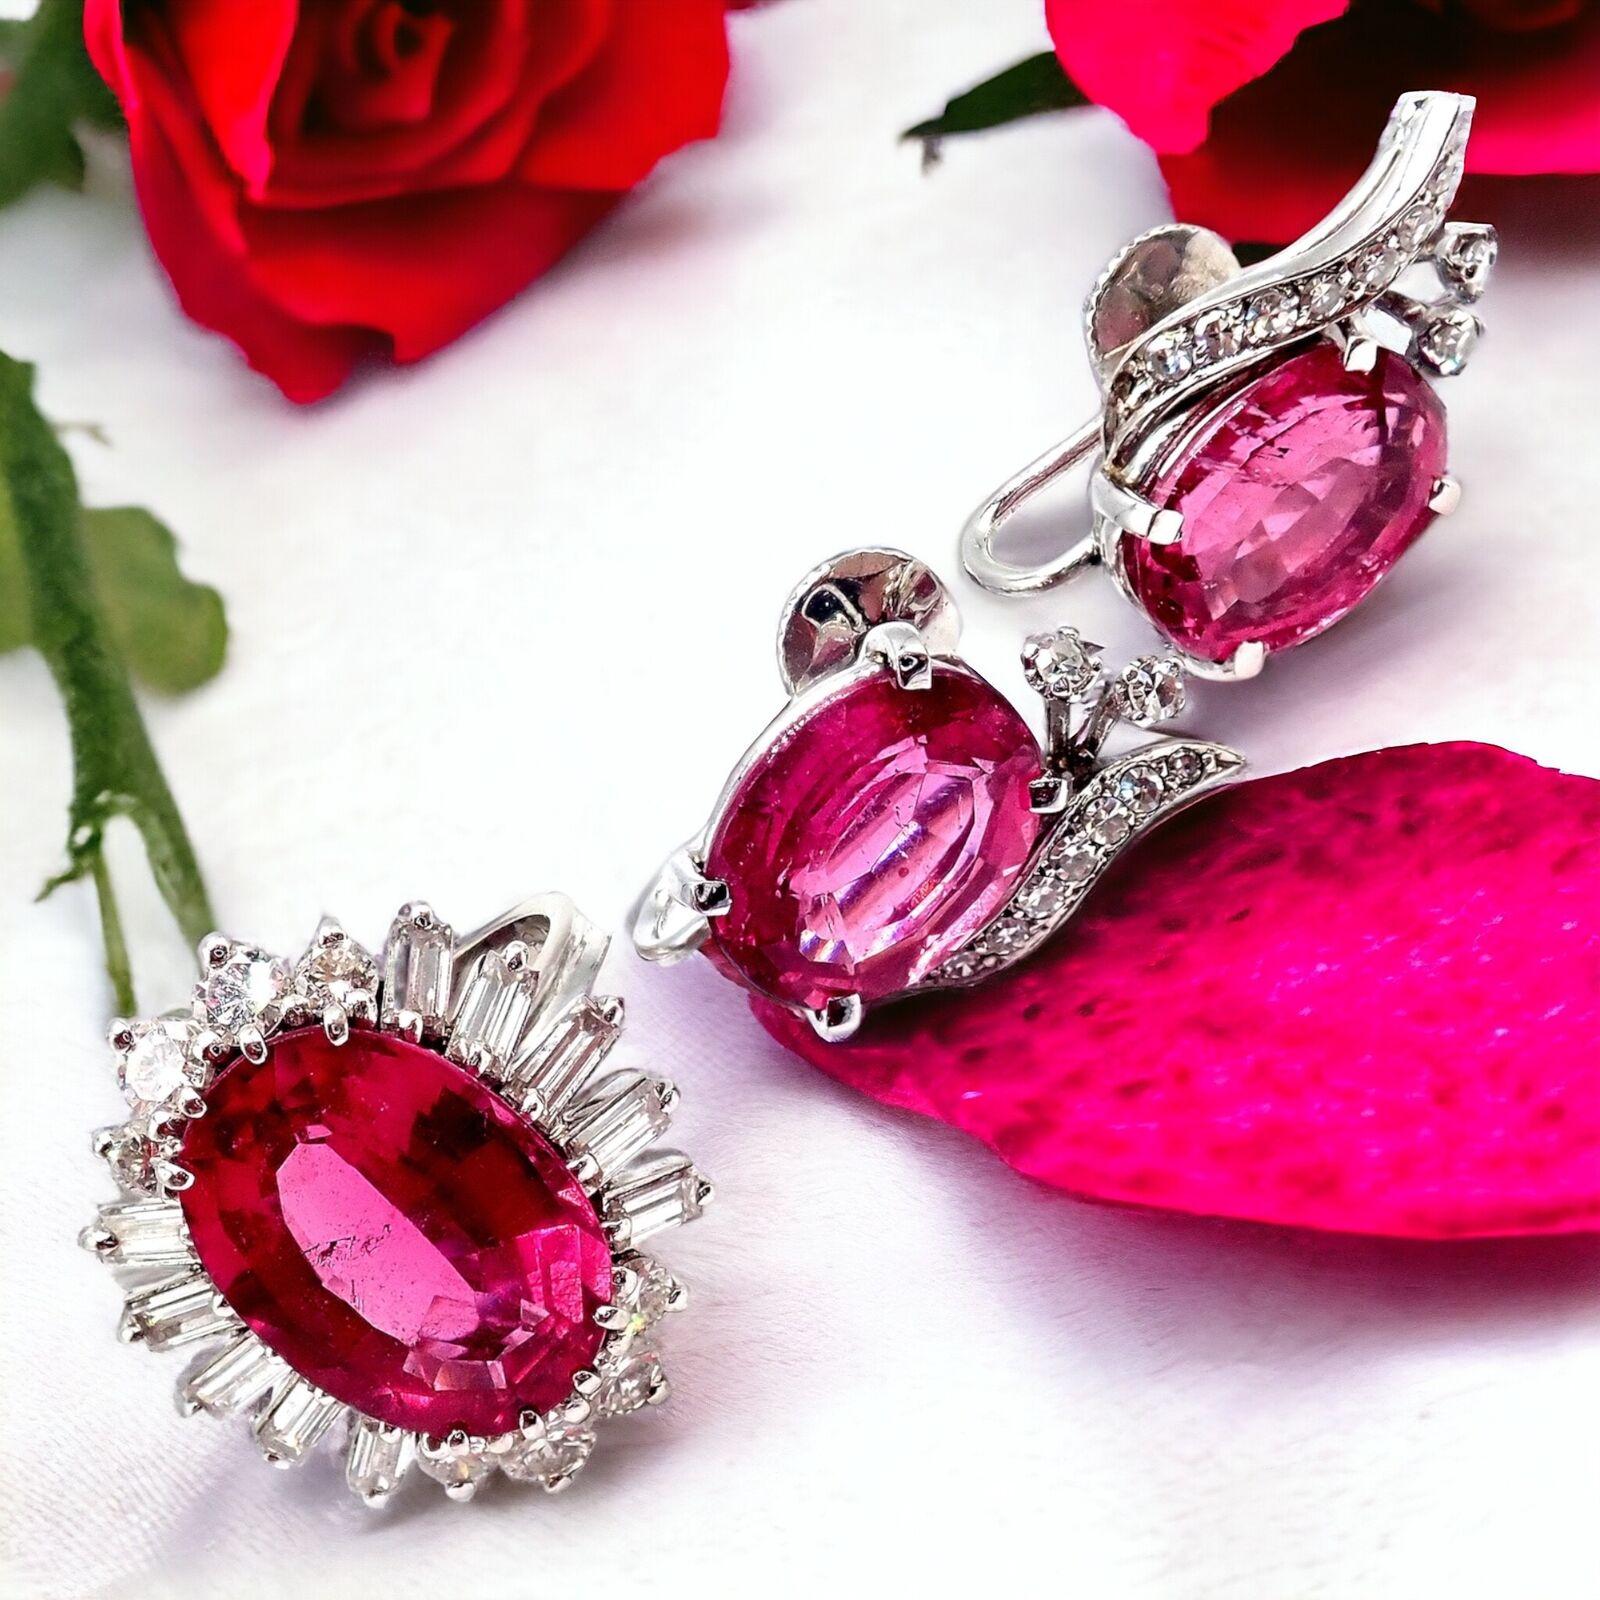 18k White Gold Diamond And Pink Tourmaline Set Of Ring & Earrings by H. Stern
With ring:
1x Pink Tourmaline - 13mm x 9.5mm
10x Emerald Cut Diamonds
8x Round Brilliant Cut Diamonds
Earrings:
2x Pink Tourmalines - 8.5mm x 11.5mm
20x Round Brilliant